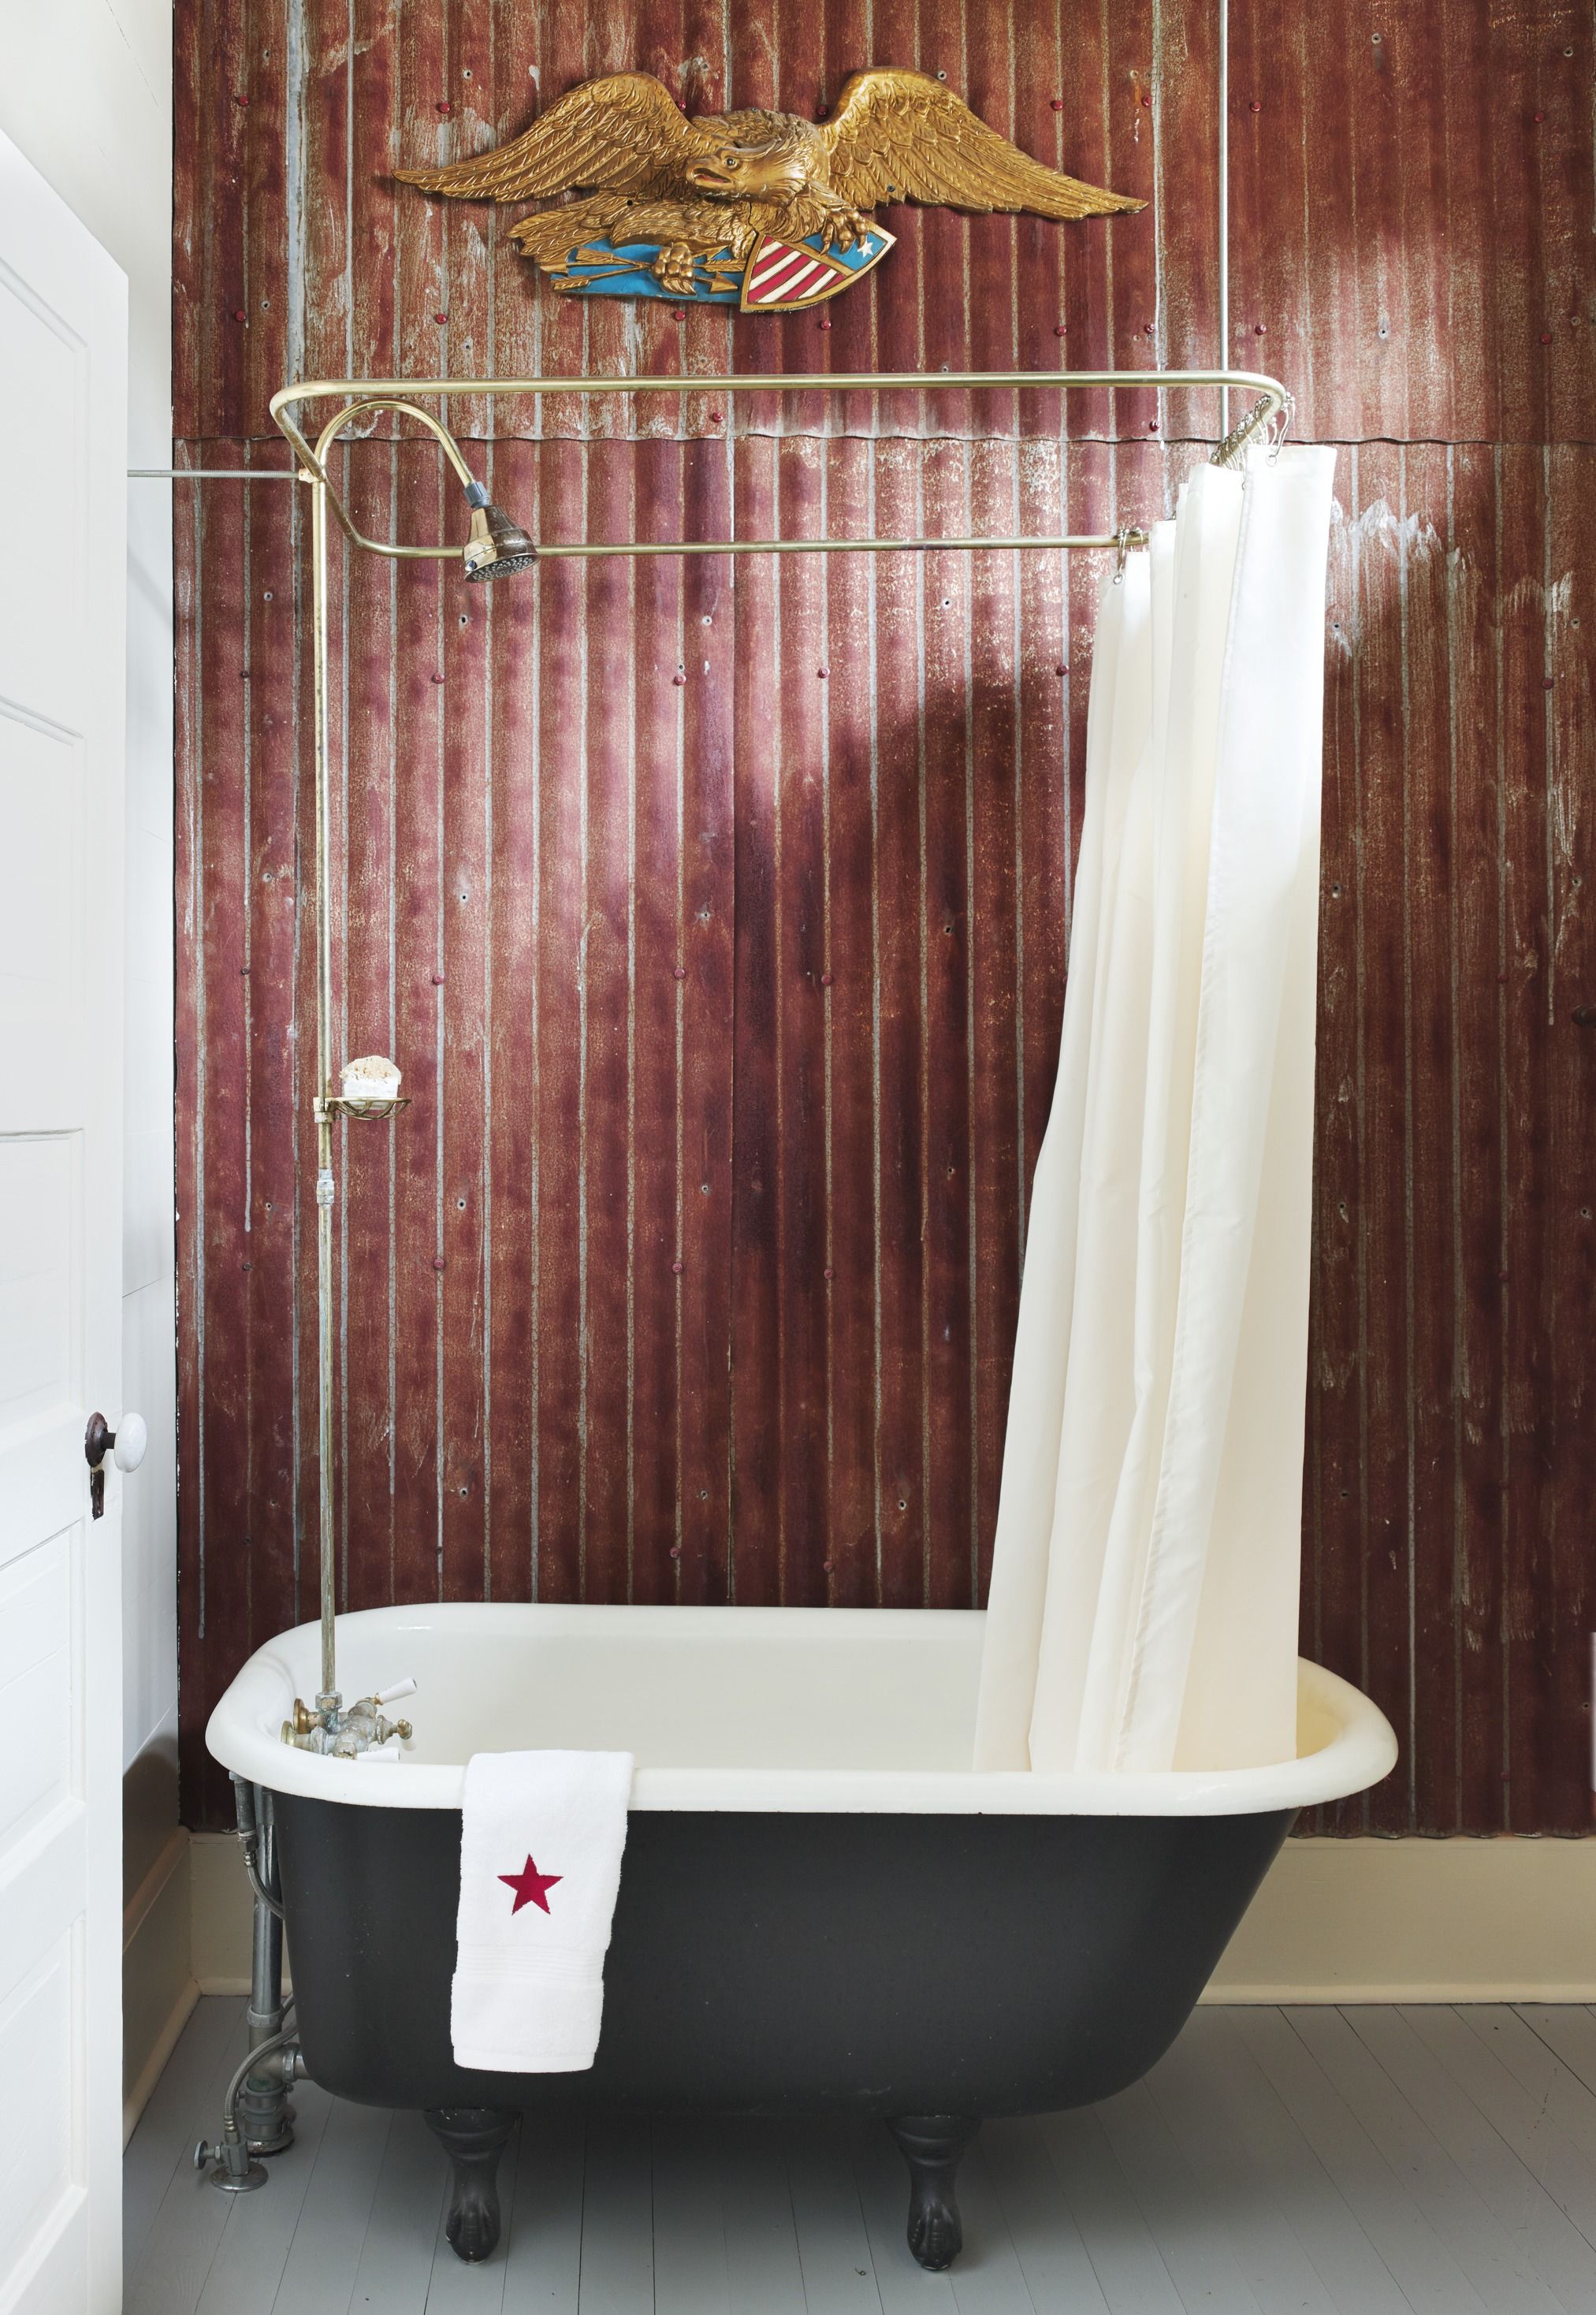 Clawfoot Tub Ideas For Your Bathroom, How To Put A Shower Curtain On Clawfoot Tub